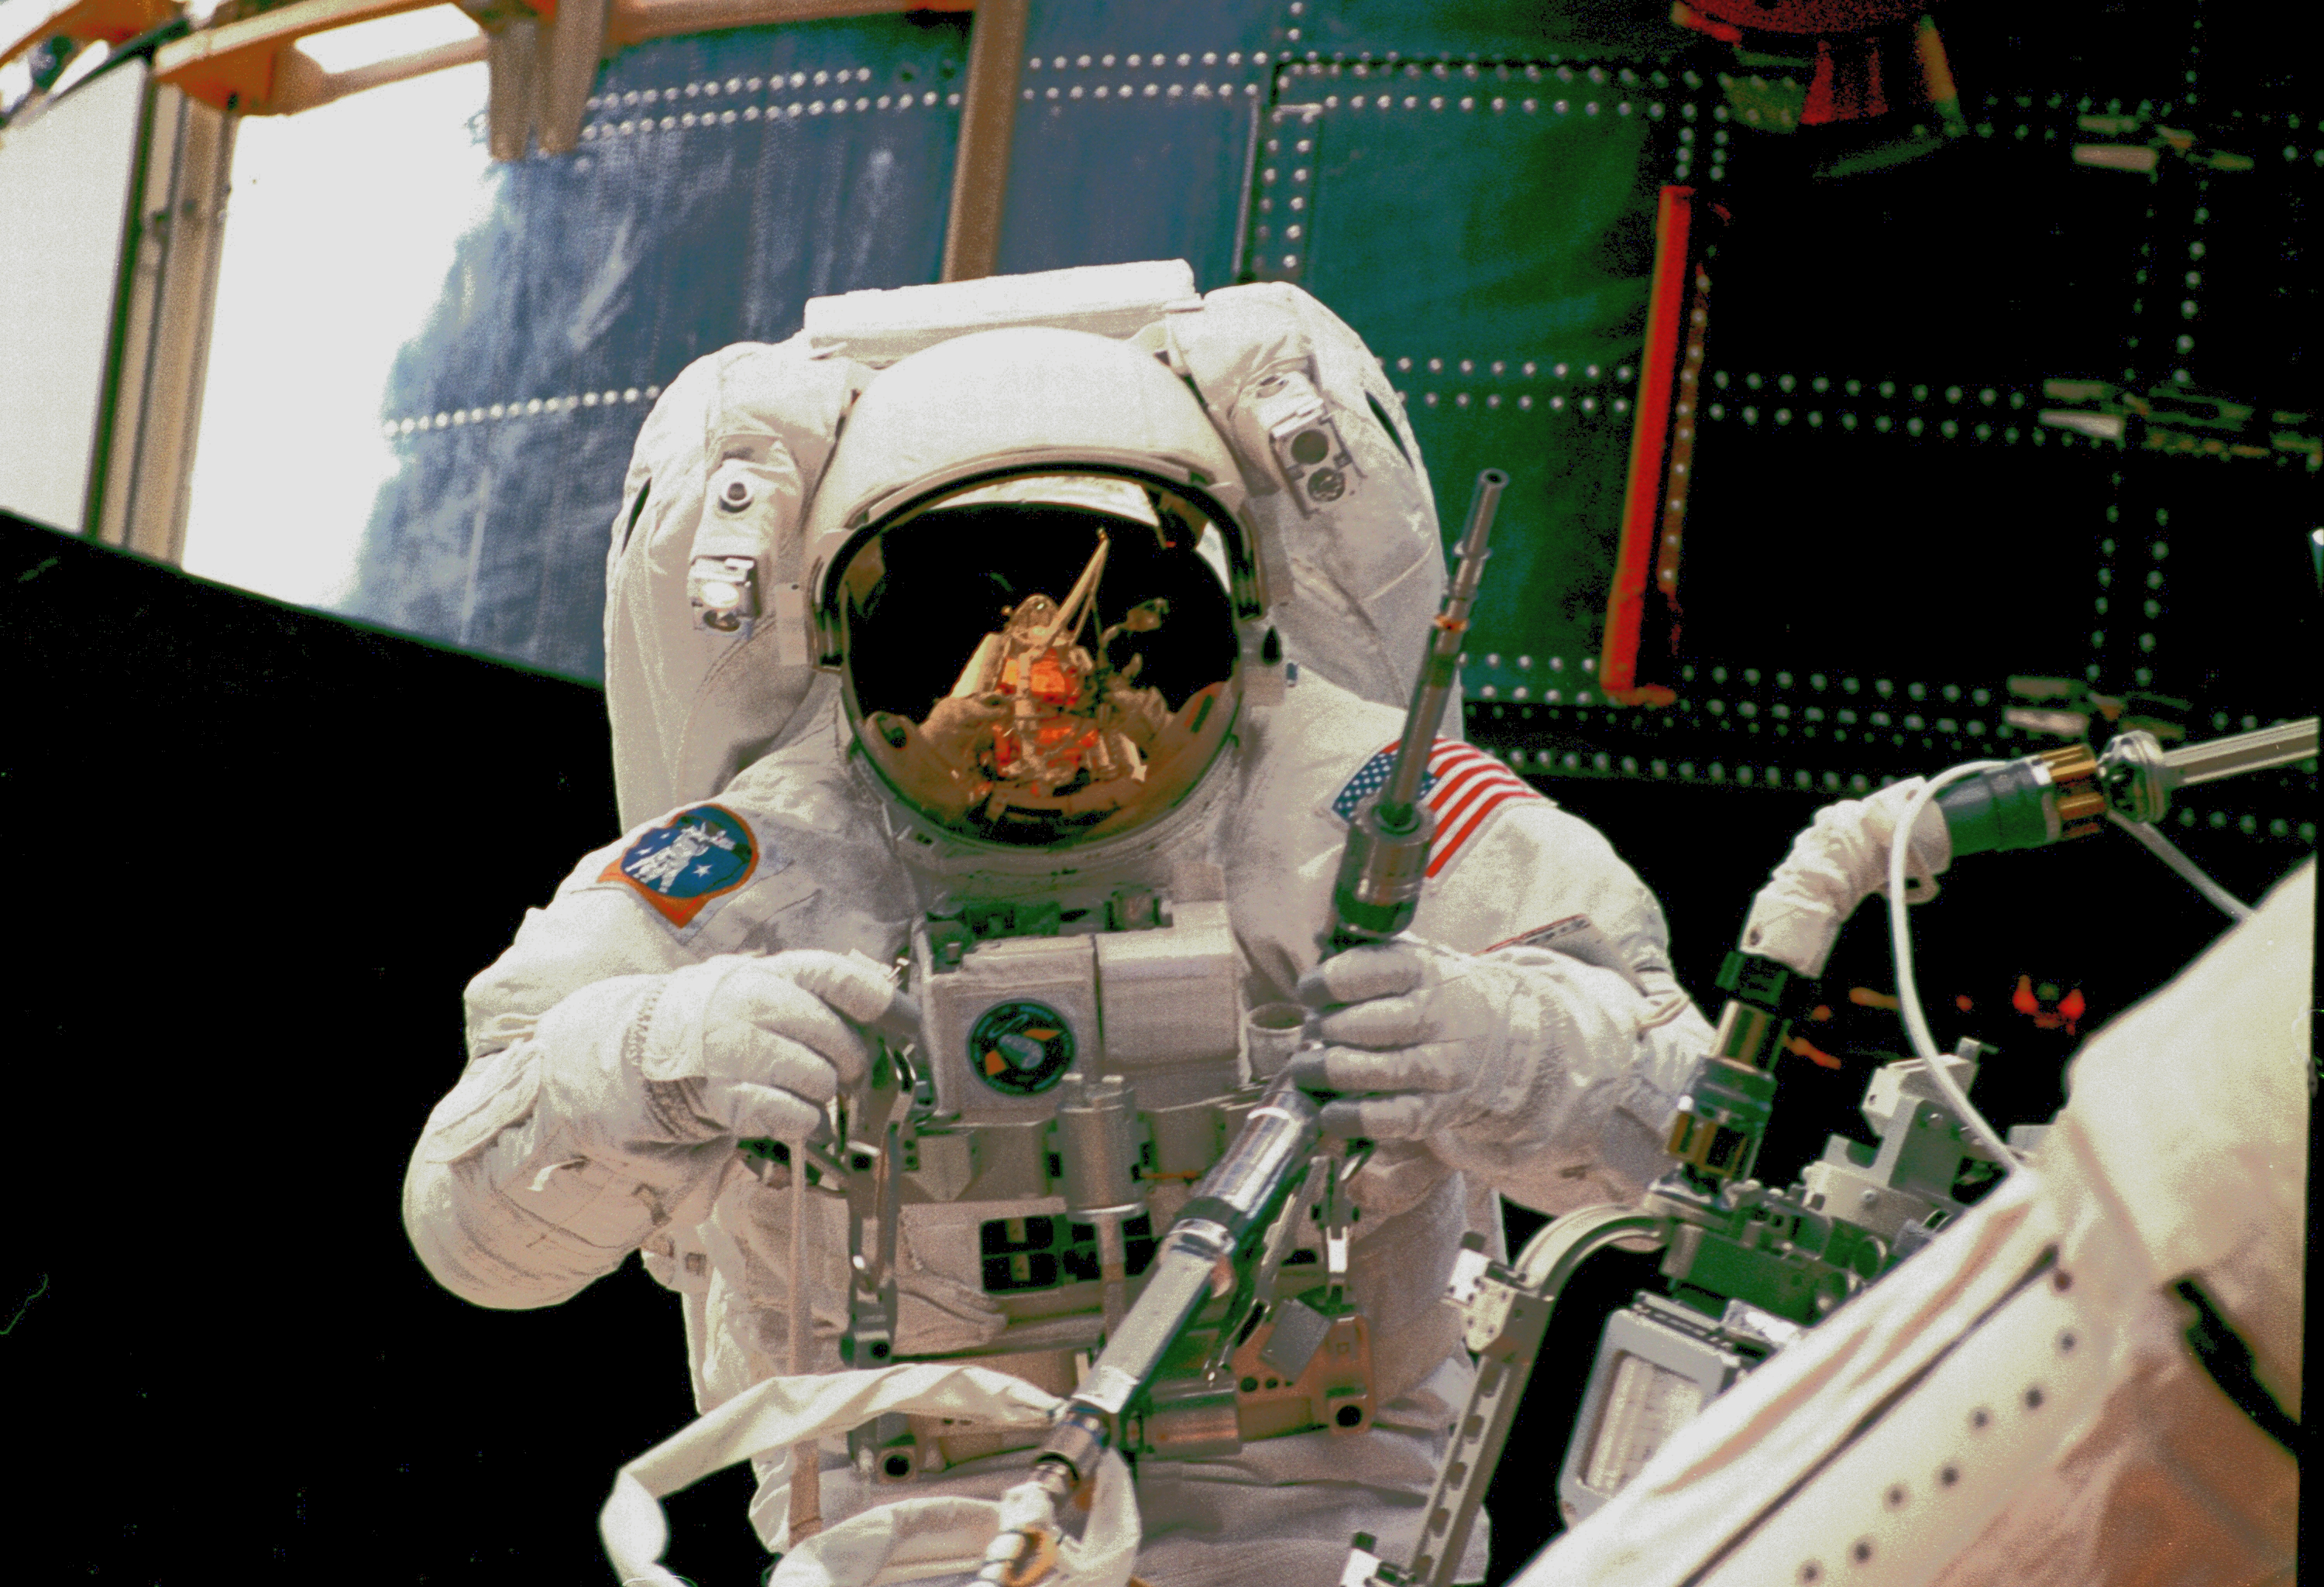 An astronaut in a spacesuit looks directly into the camera while holding a tool shaped like a long, thin drill. Part of Hubble is visible behind him and his helmet reflects the space shuttle bay.